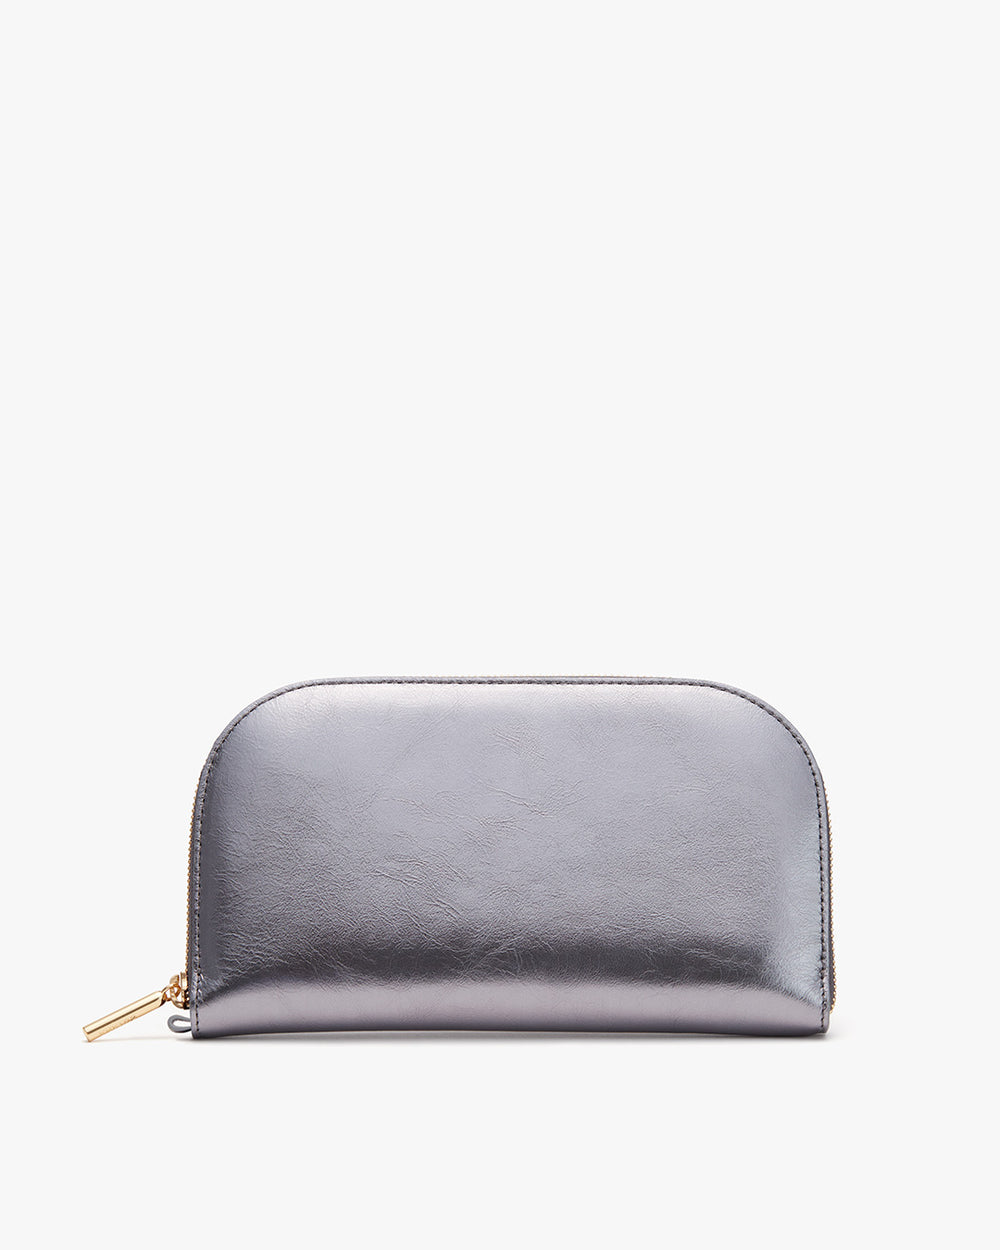 Zippered pouch on a plain background.